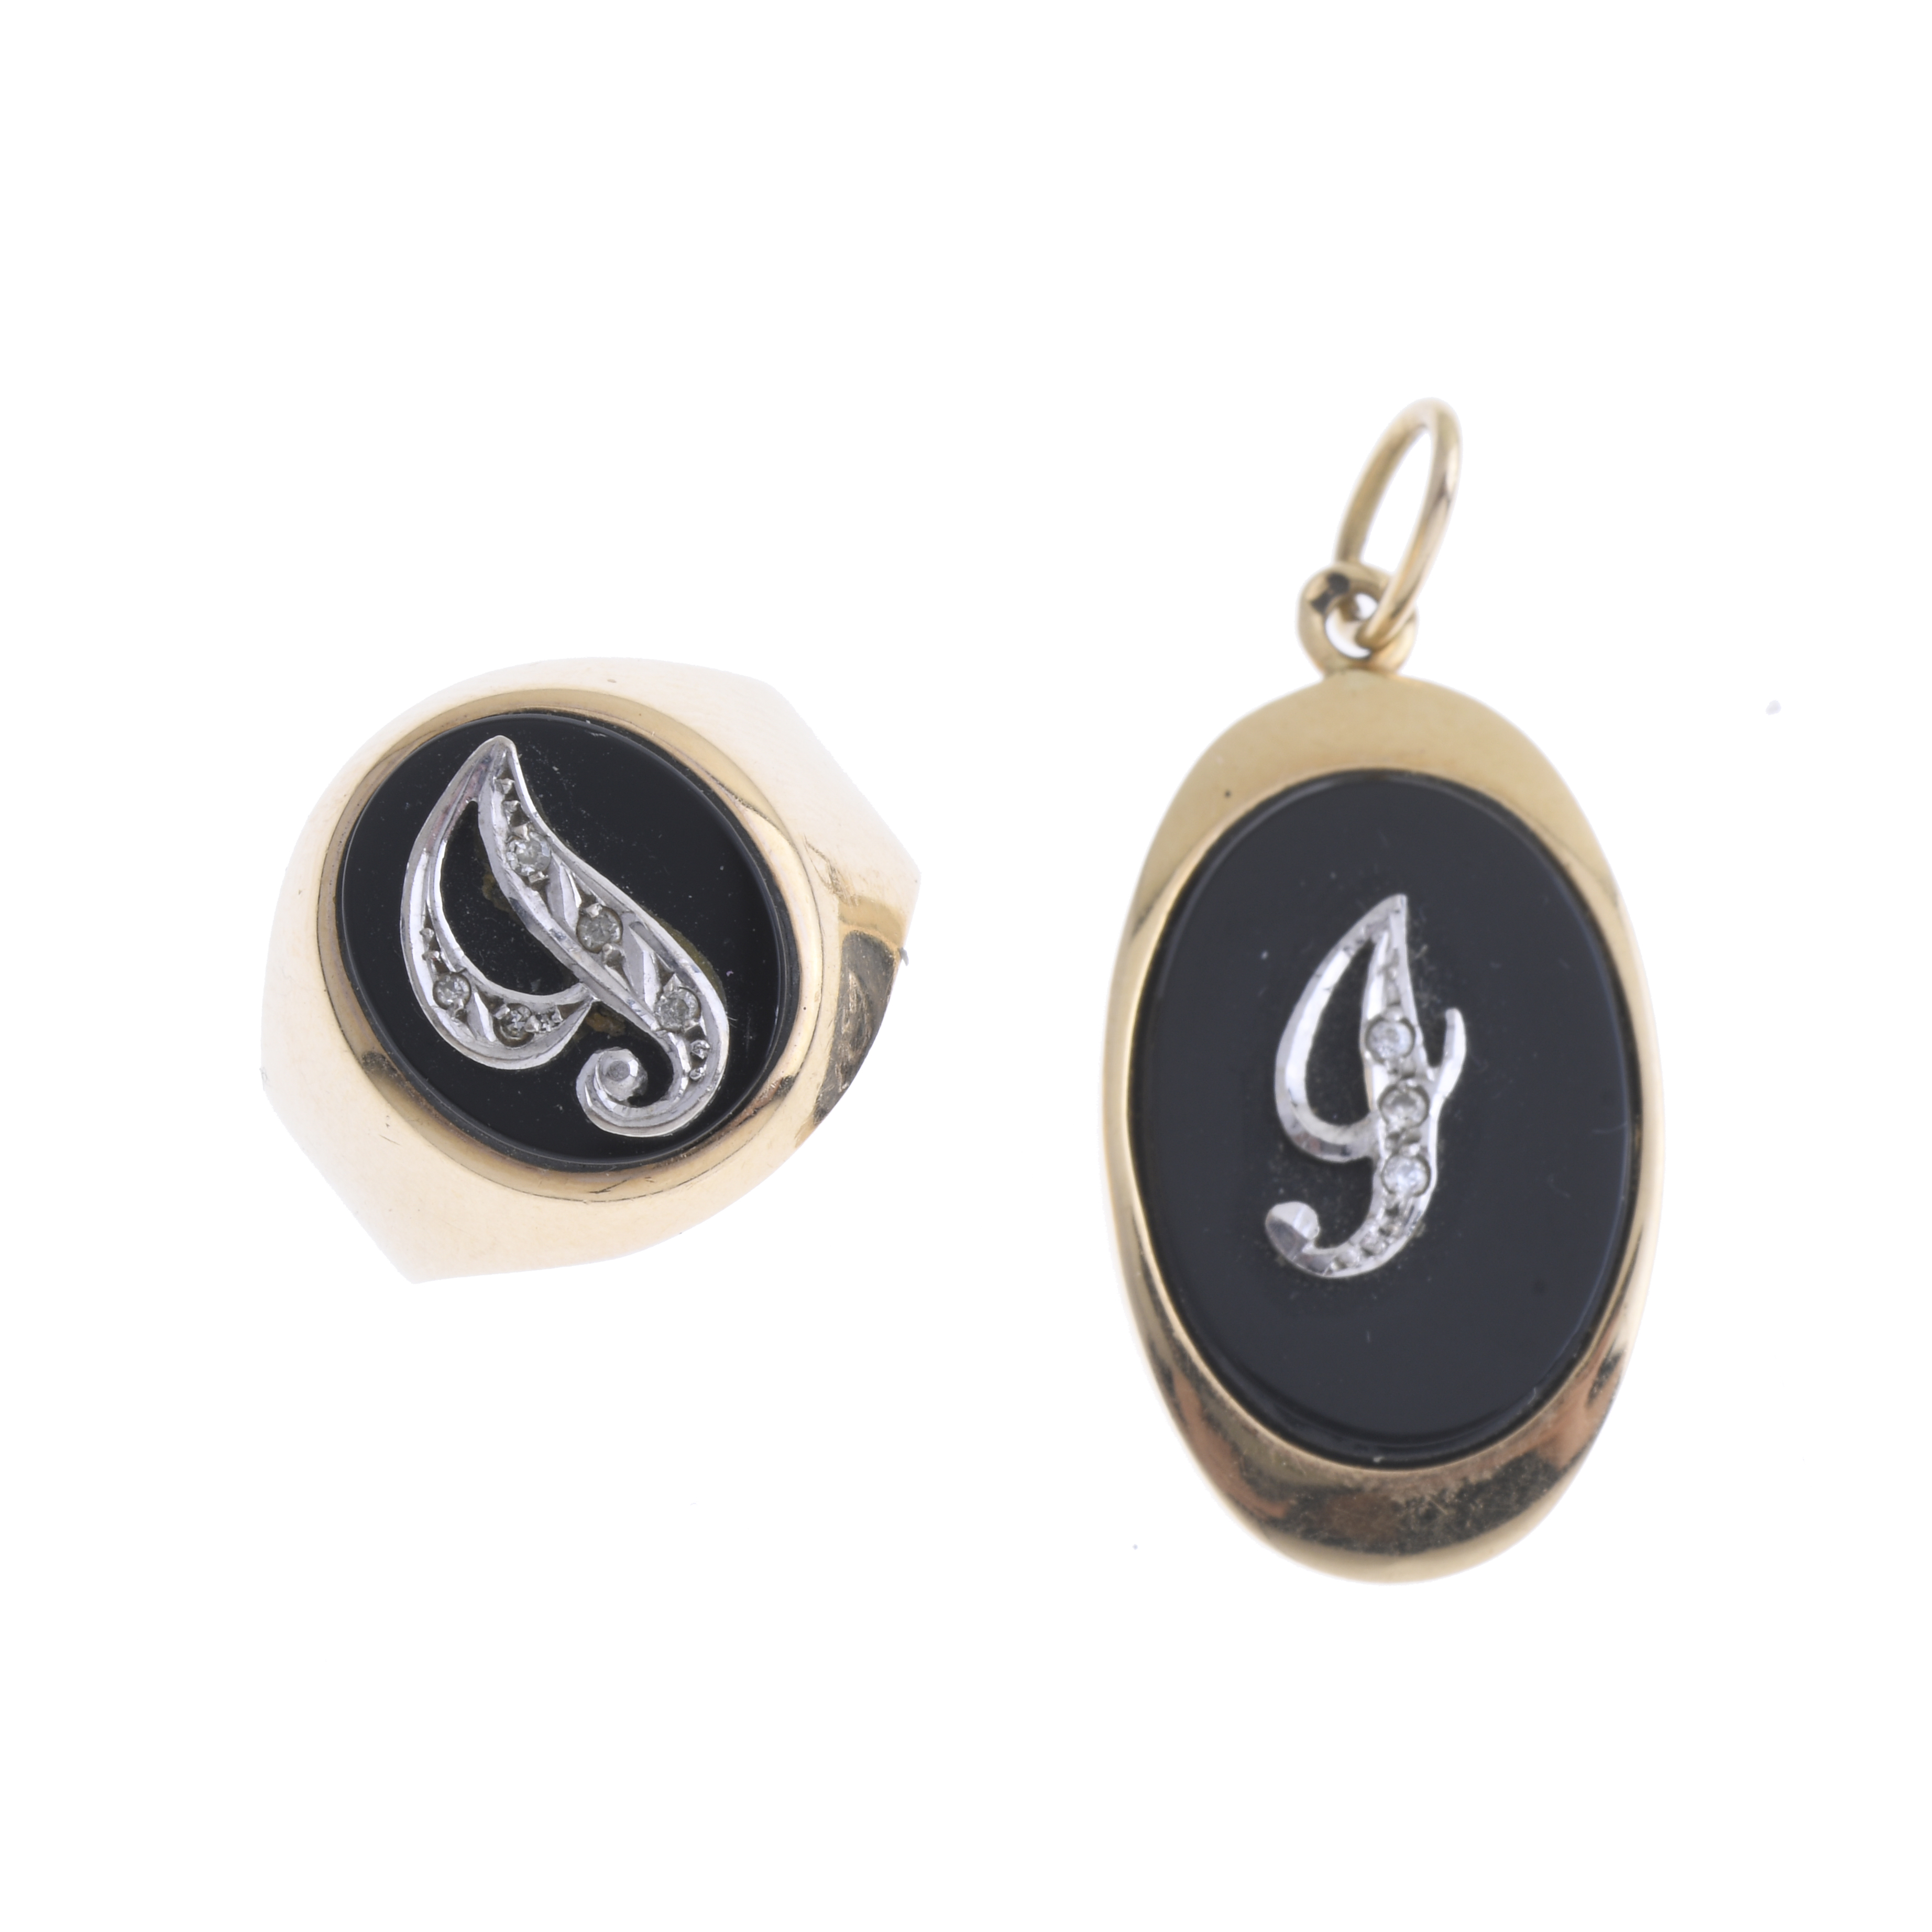 GOLD AND ONYX RING AND PENDANT SET.